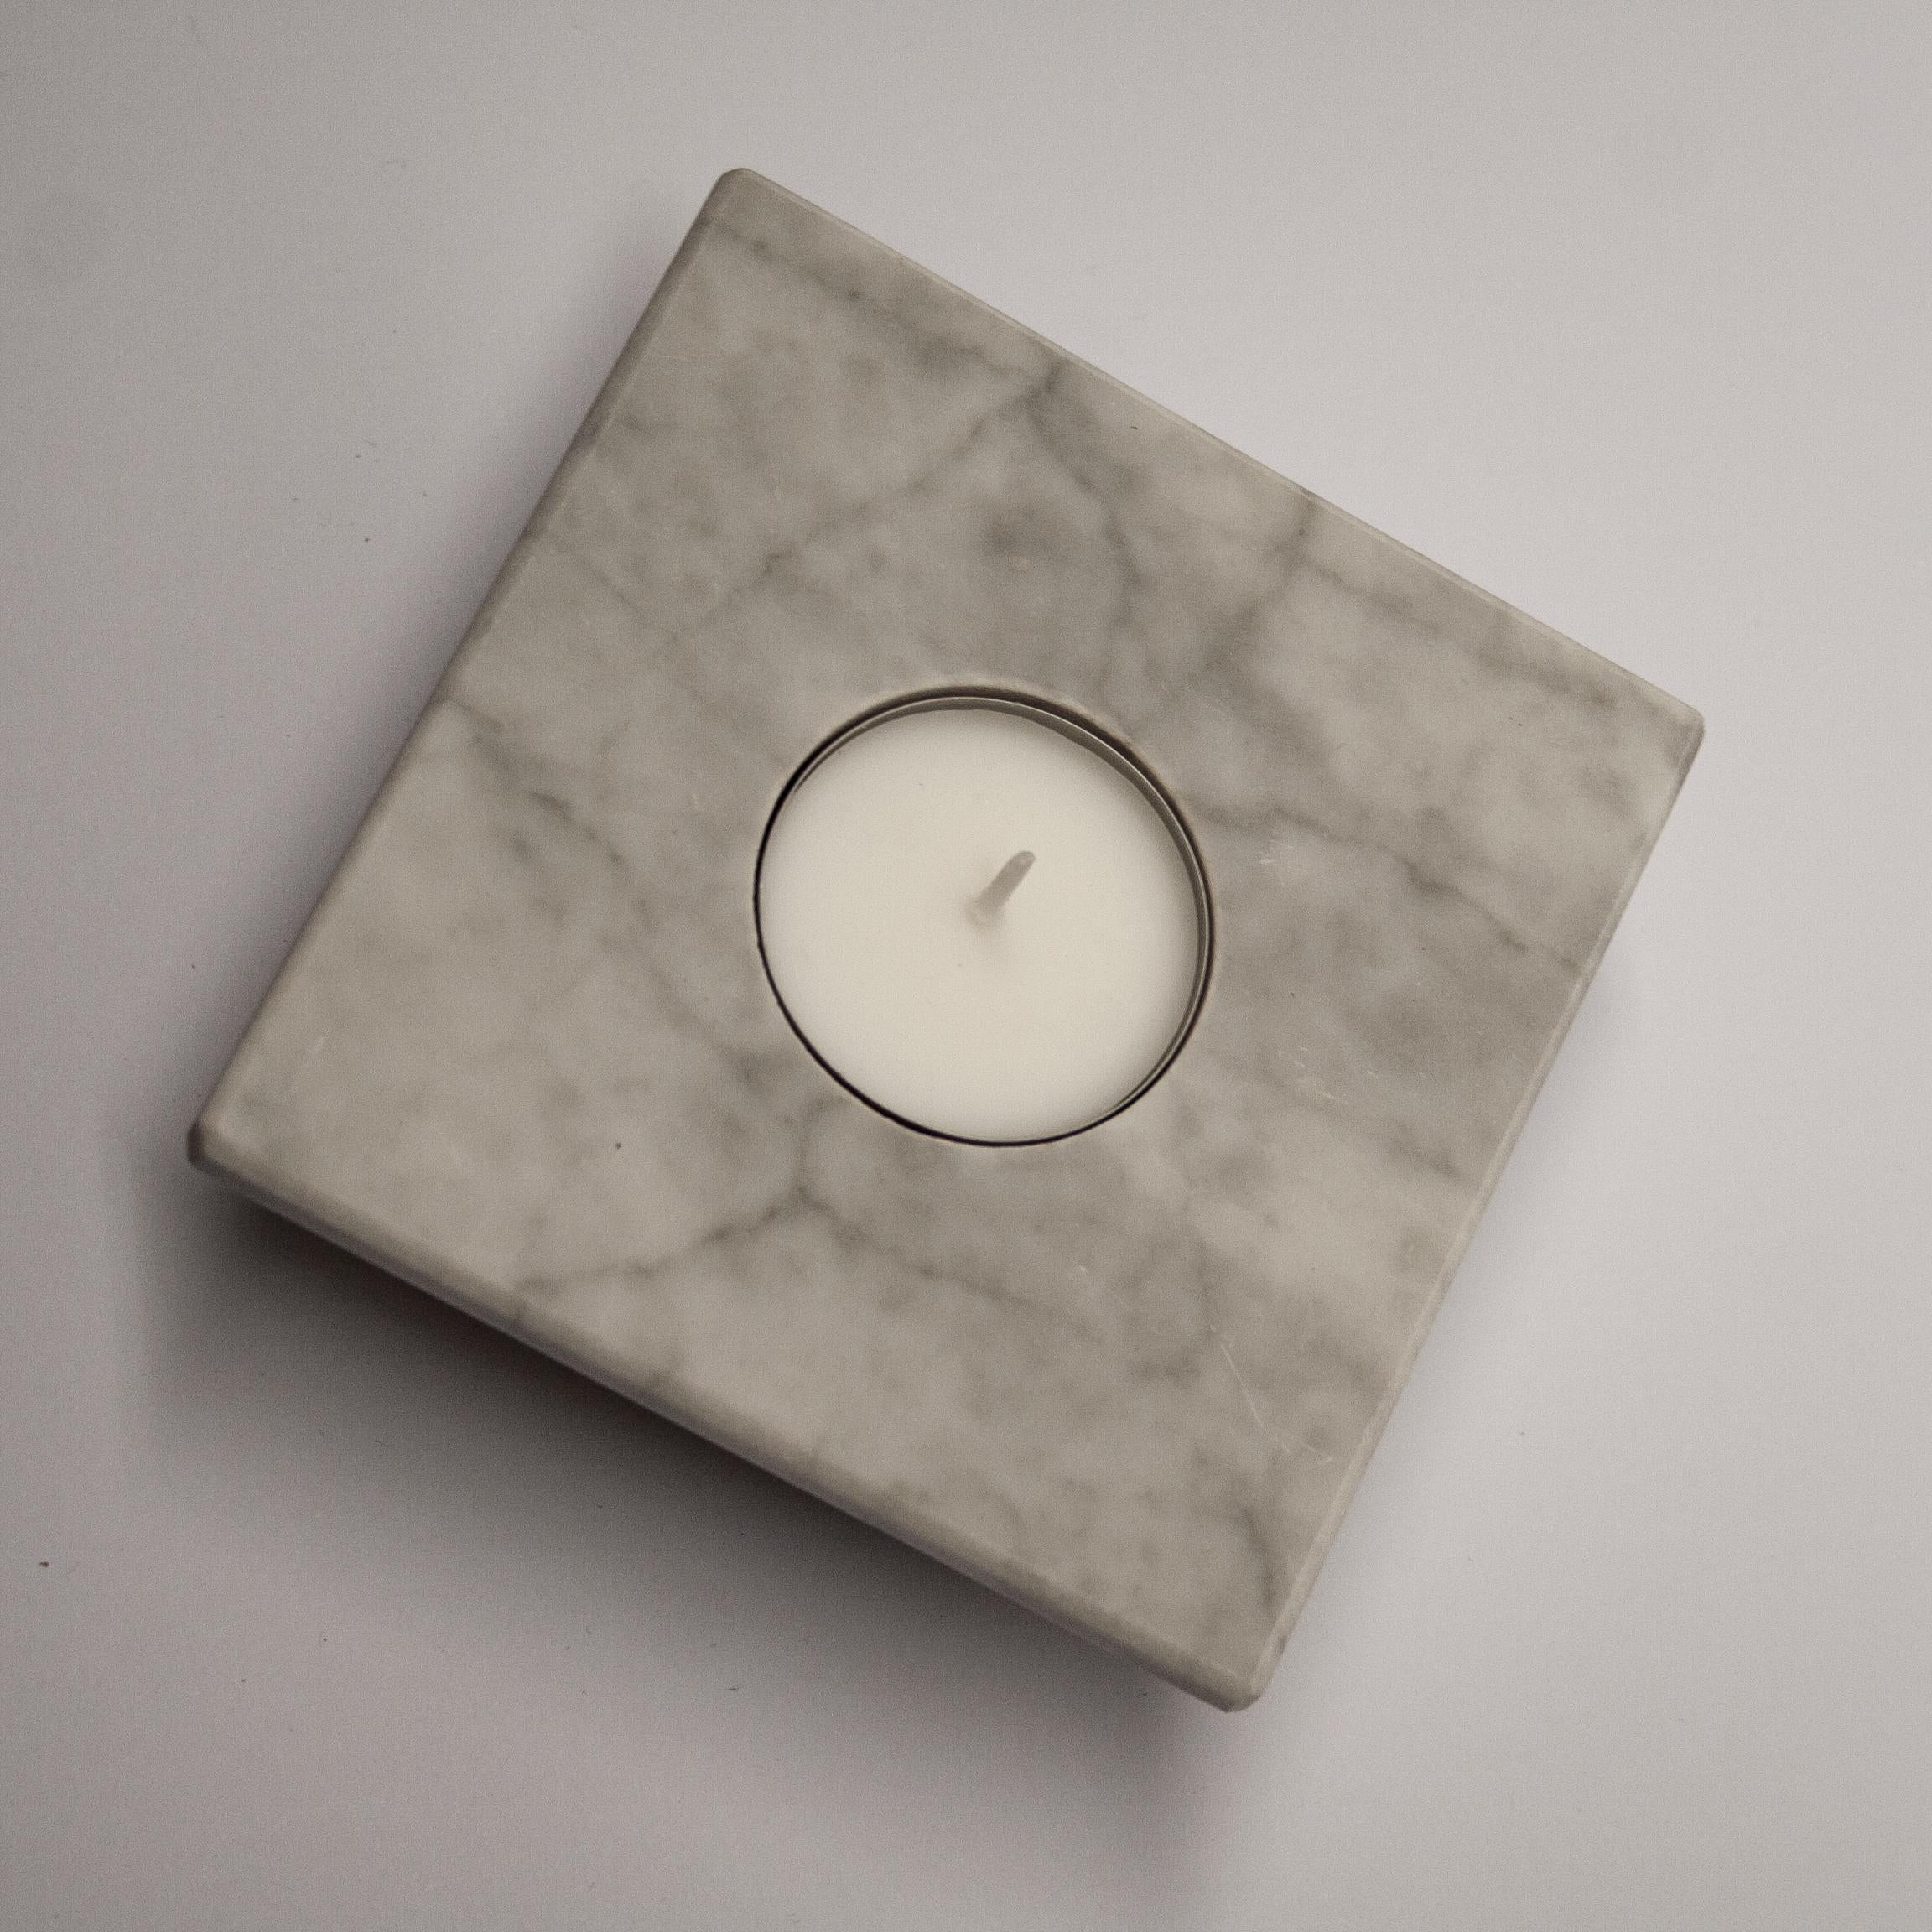 White Carrara Marble Candle Holder Contemporary Design Mother’s Day Gift Spain.
Beautiful candle holder of unique and simple design, it is an inverted pyramid of solid marble.
At the top a square with a hole in the shape of a central circle where to